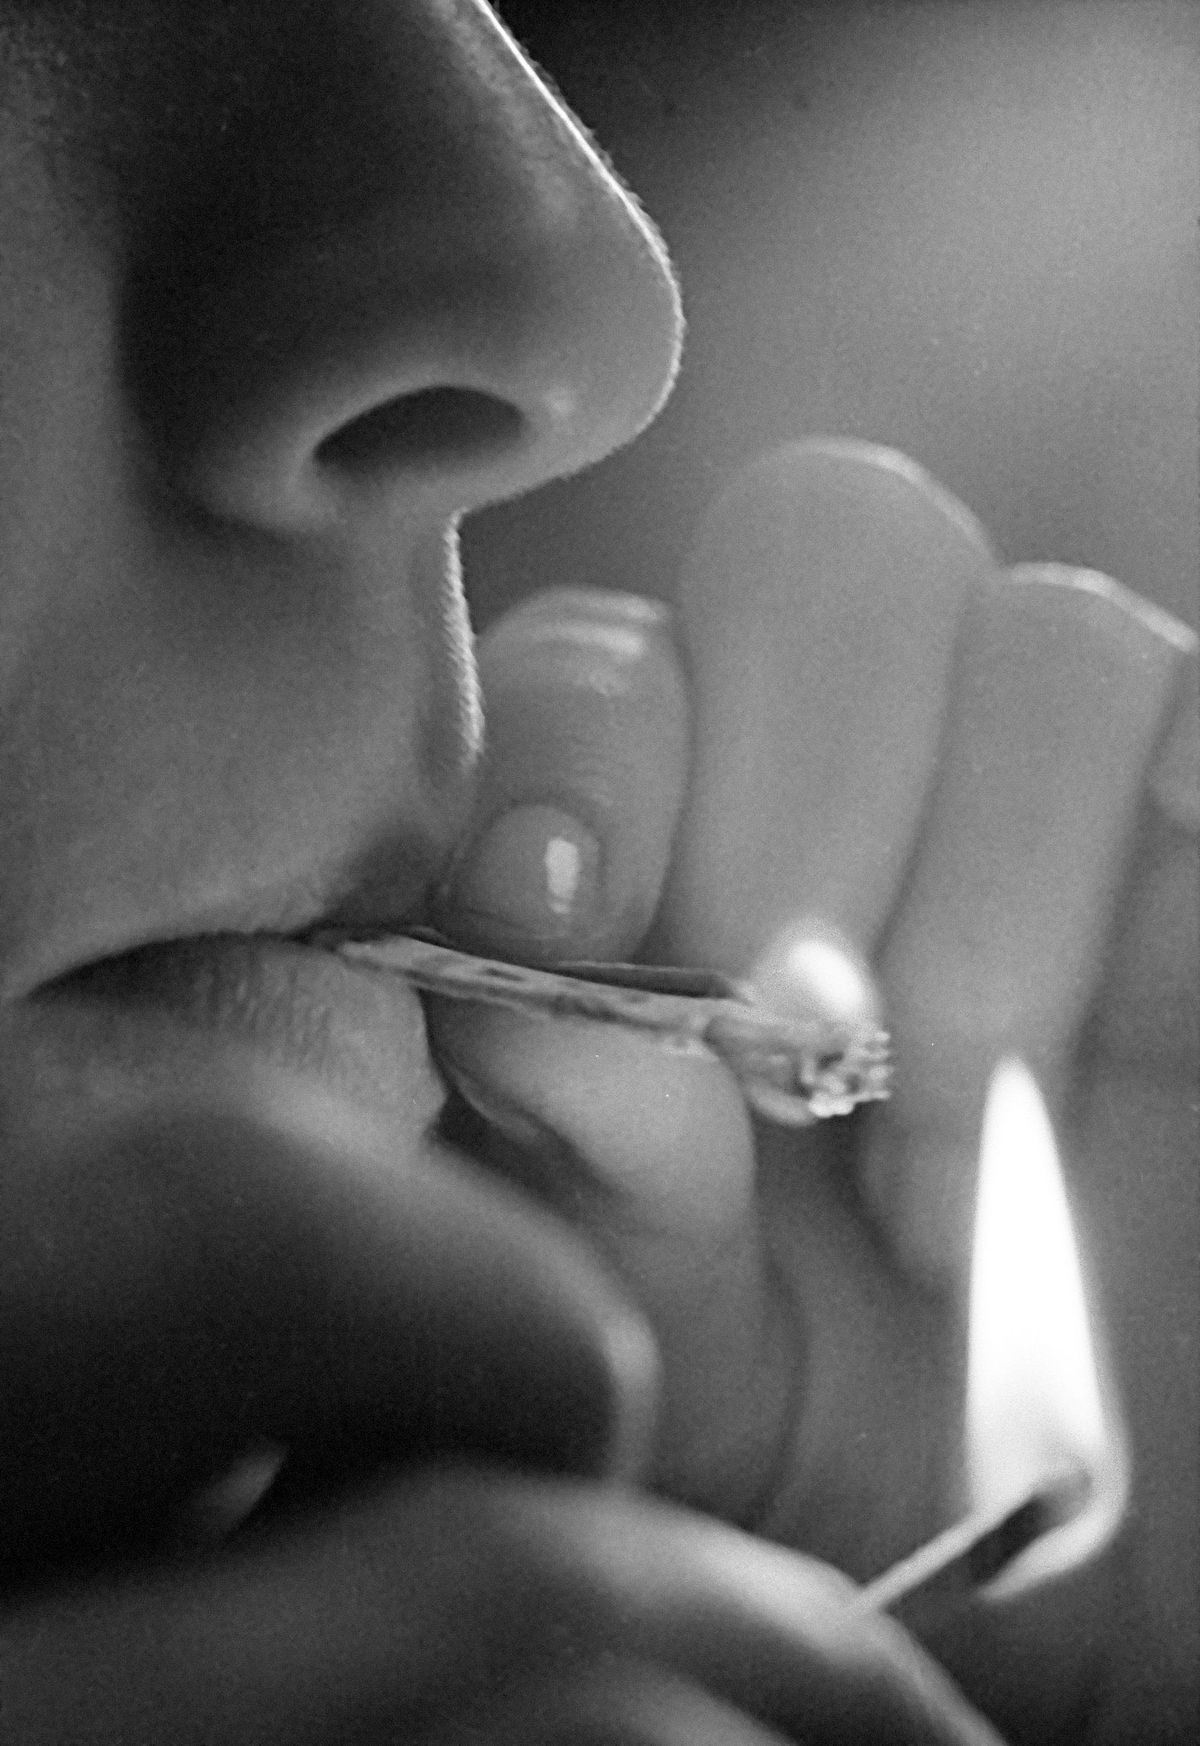 FILE - In this Jan. 24, 1972, file photo, a teenager relights the remainder of a marijuana joint. In 1972 a commission appointed by President Richard Nixon to study marijuana said it should be decriminalized and regulated. Nixon rejected that, but a dozen states in the 1970s went on to eliminate jail time as a punishment for pot arrests. On the occasion of  �Legalization Day,� Thursday, Dec. 6, 2012, when Washington�s new law takes effect, AP takes a look back at the cultural and legal status of the �evil weed� in American history. (Jerry Mosey / Associated Press)